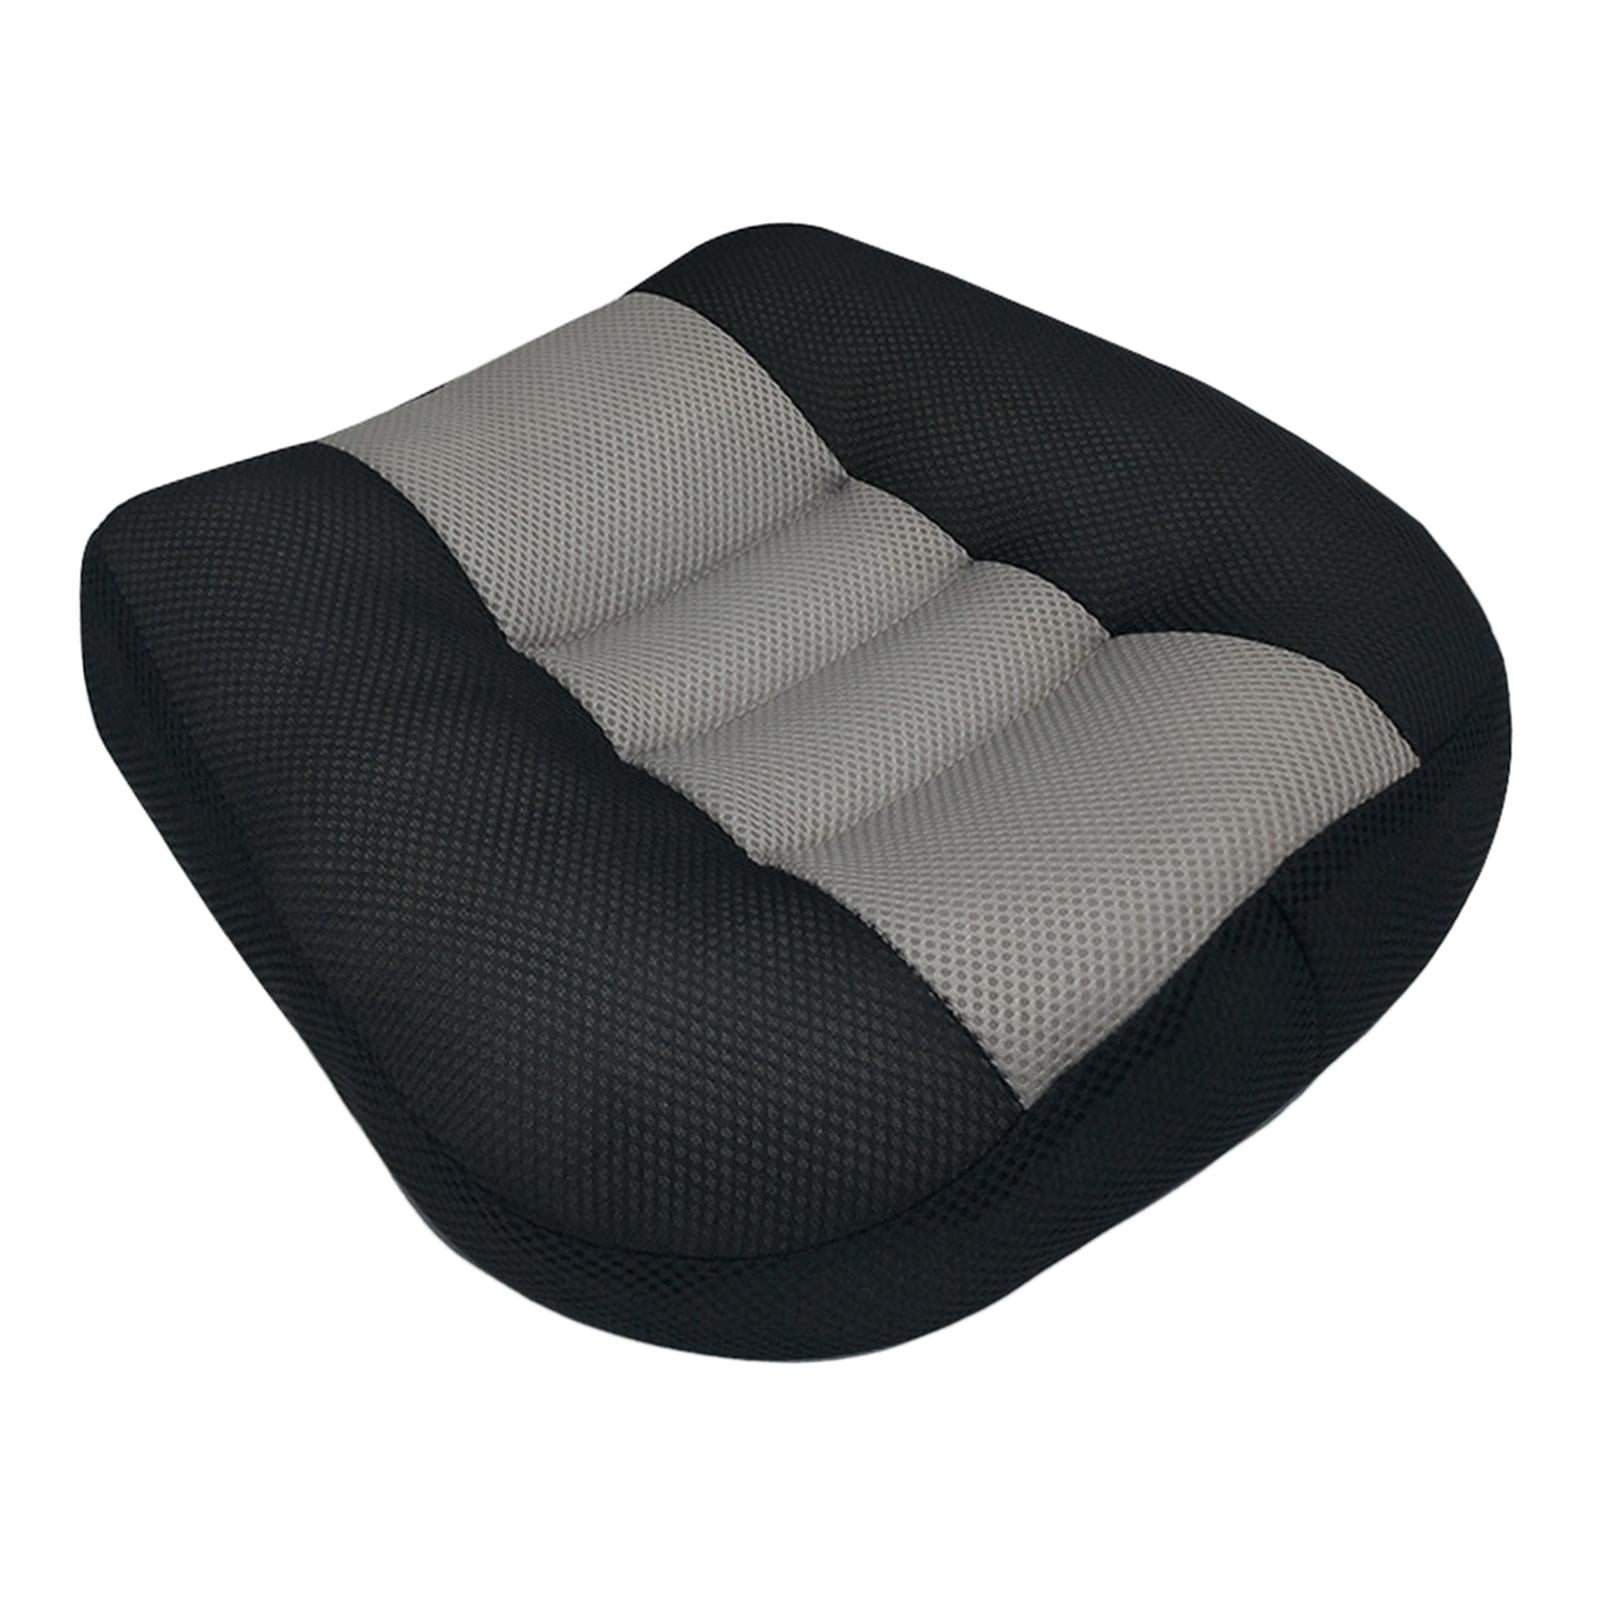 PRELGOSP Adult Car Seat Cushion, Portable Car Booster Cushion, Soft Non-Slip Car Seat Cushions for Driving, Office, Home, Effectively Increase The